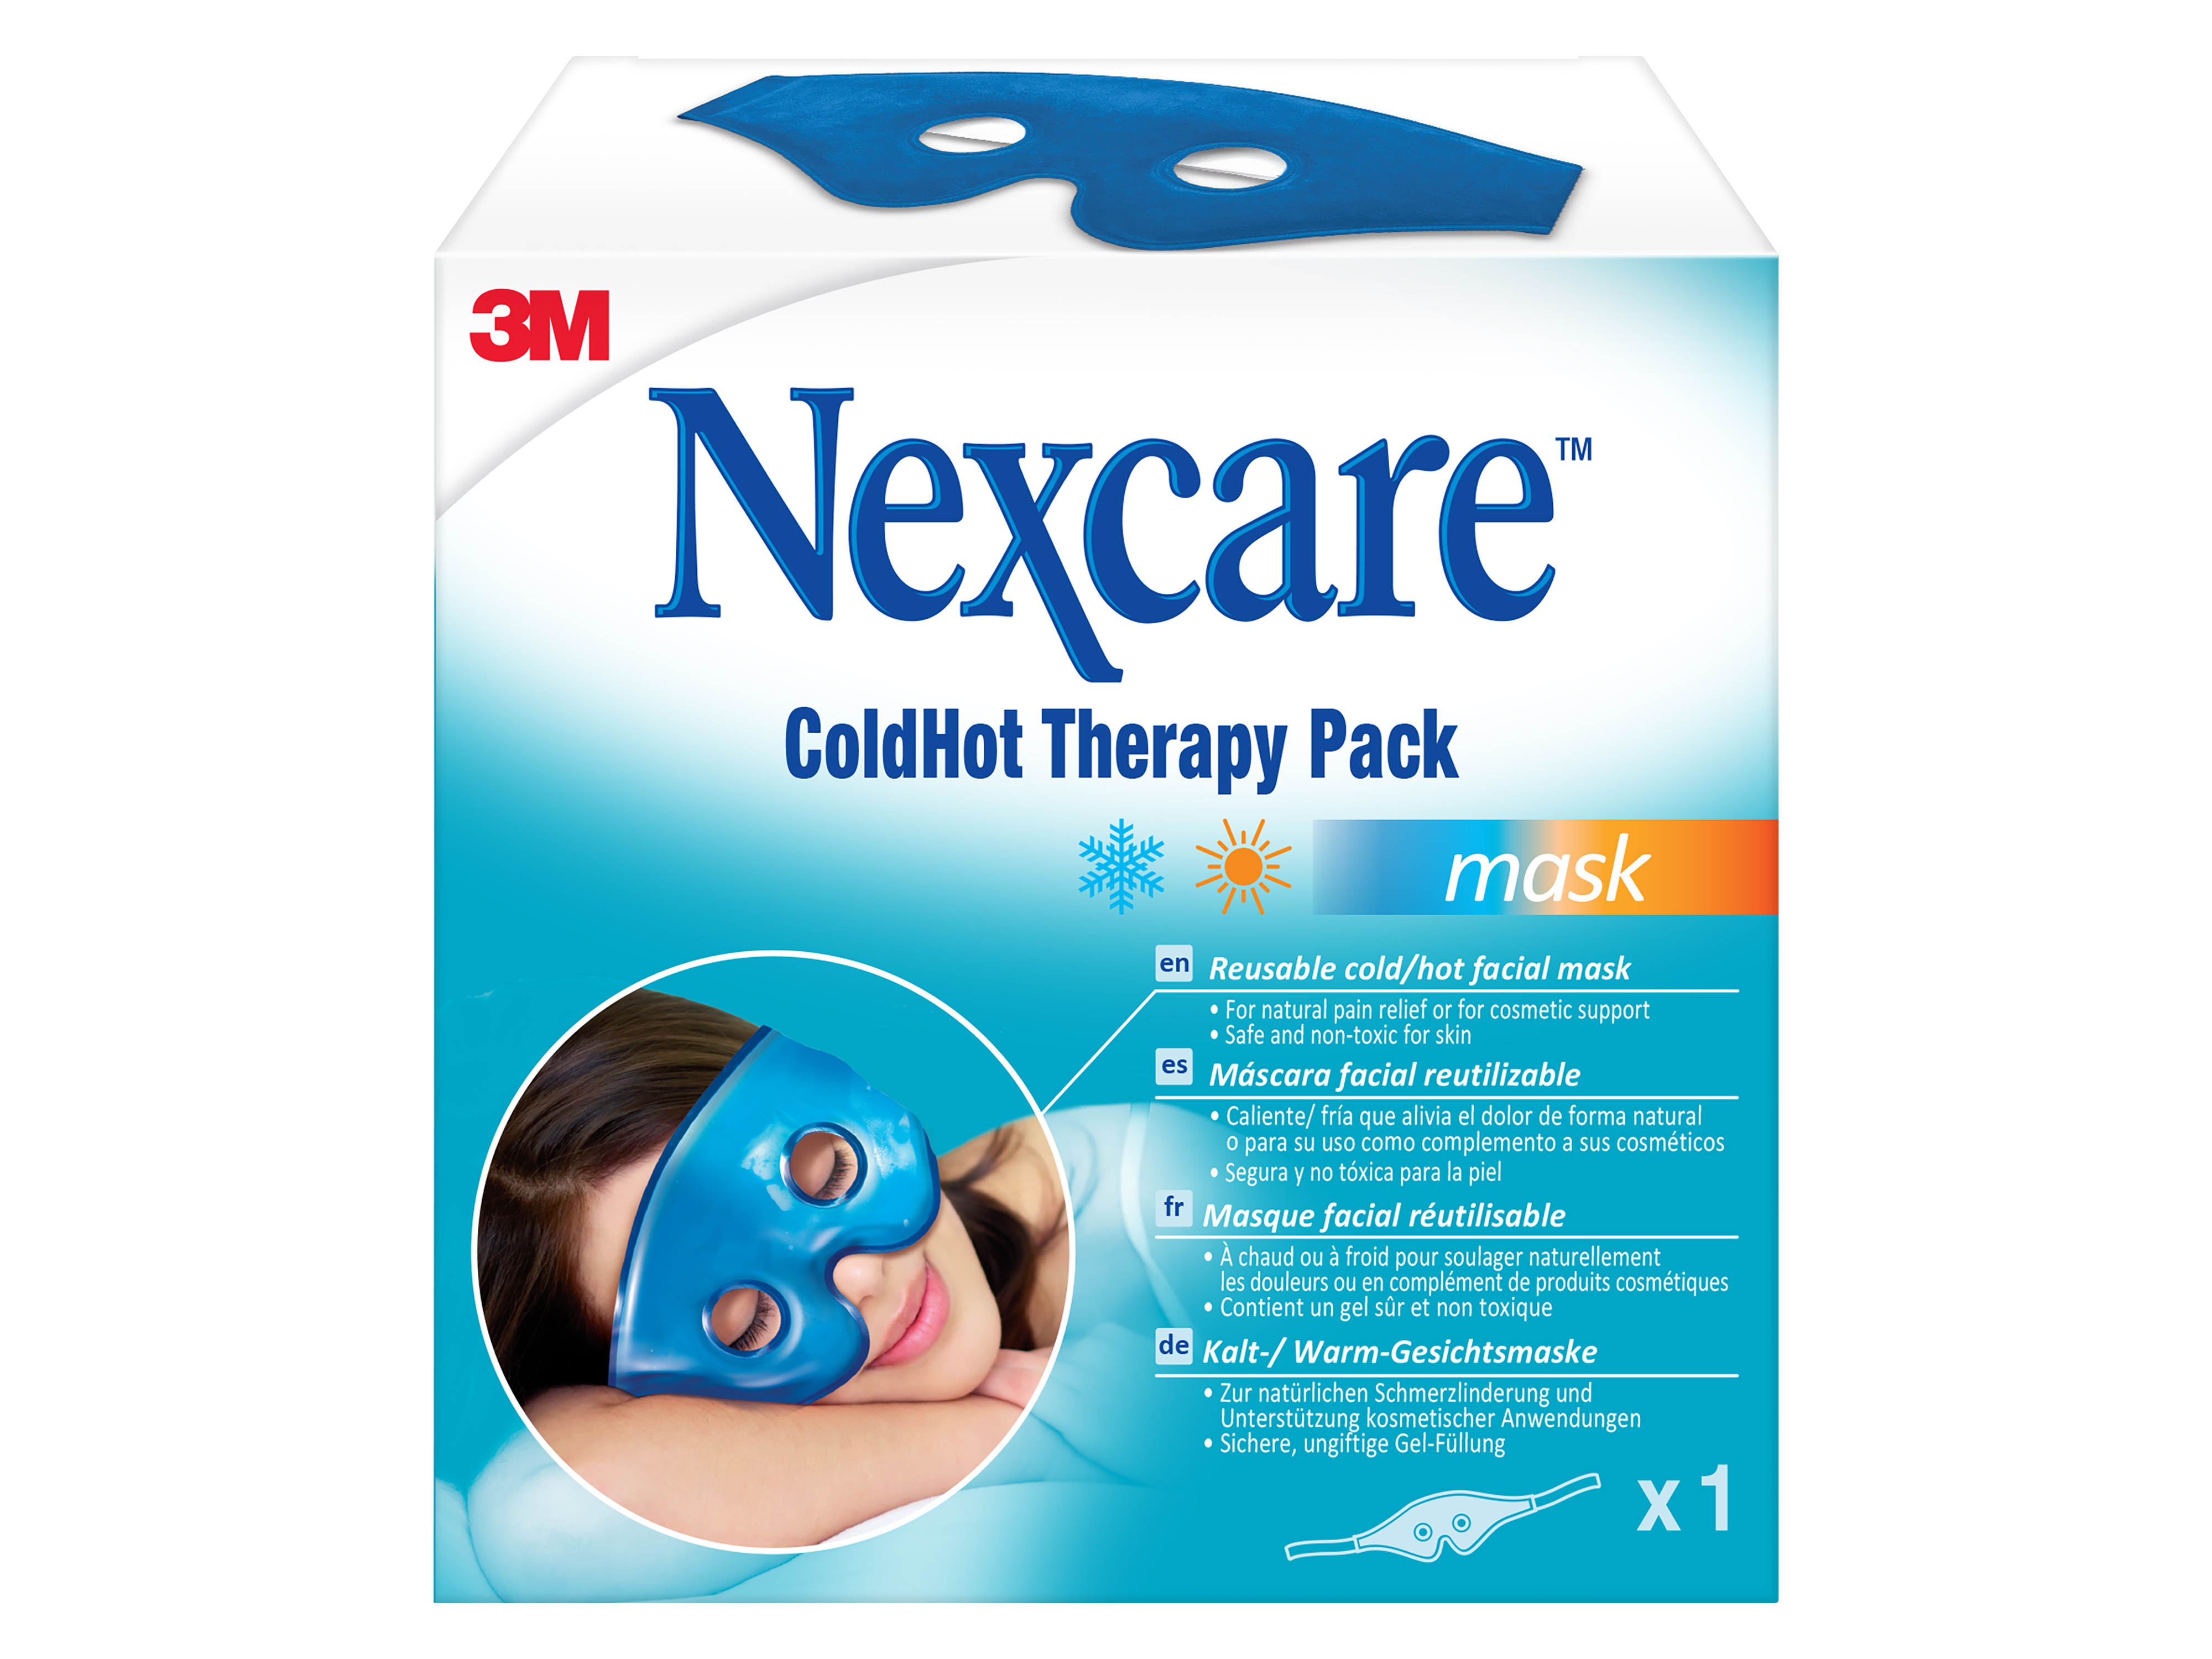 Nexcare ColdHot Therapy Pack, 1 stk.